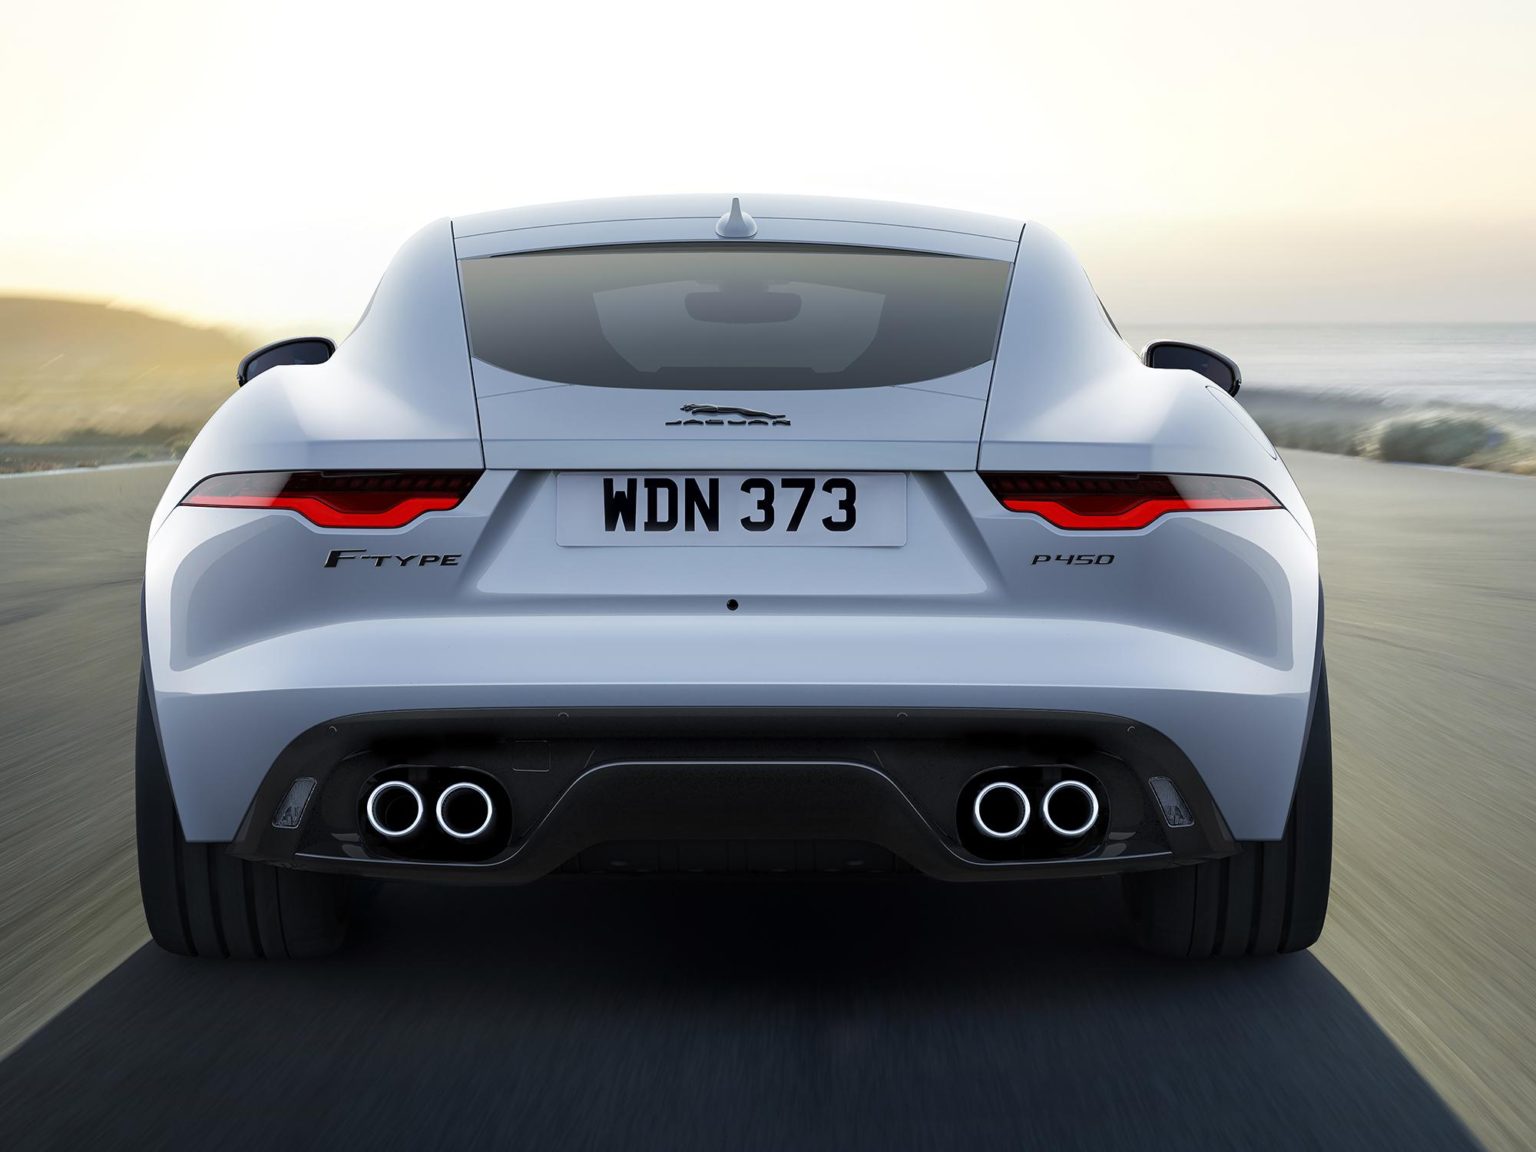 The F-Type P450 cars replace the P300 and P380 as part of the Jaguar lineup.